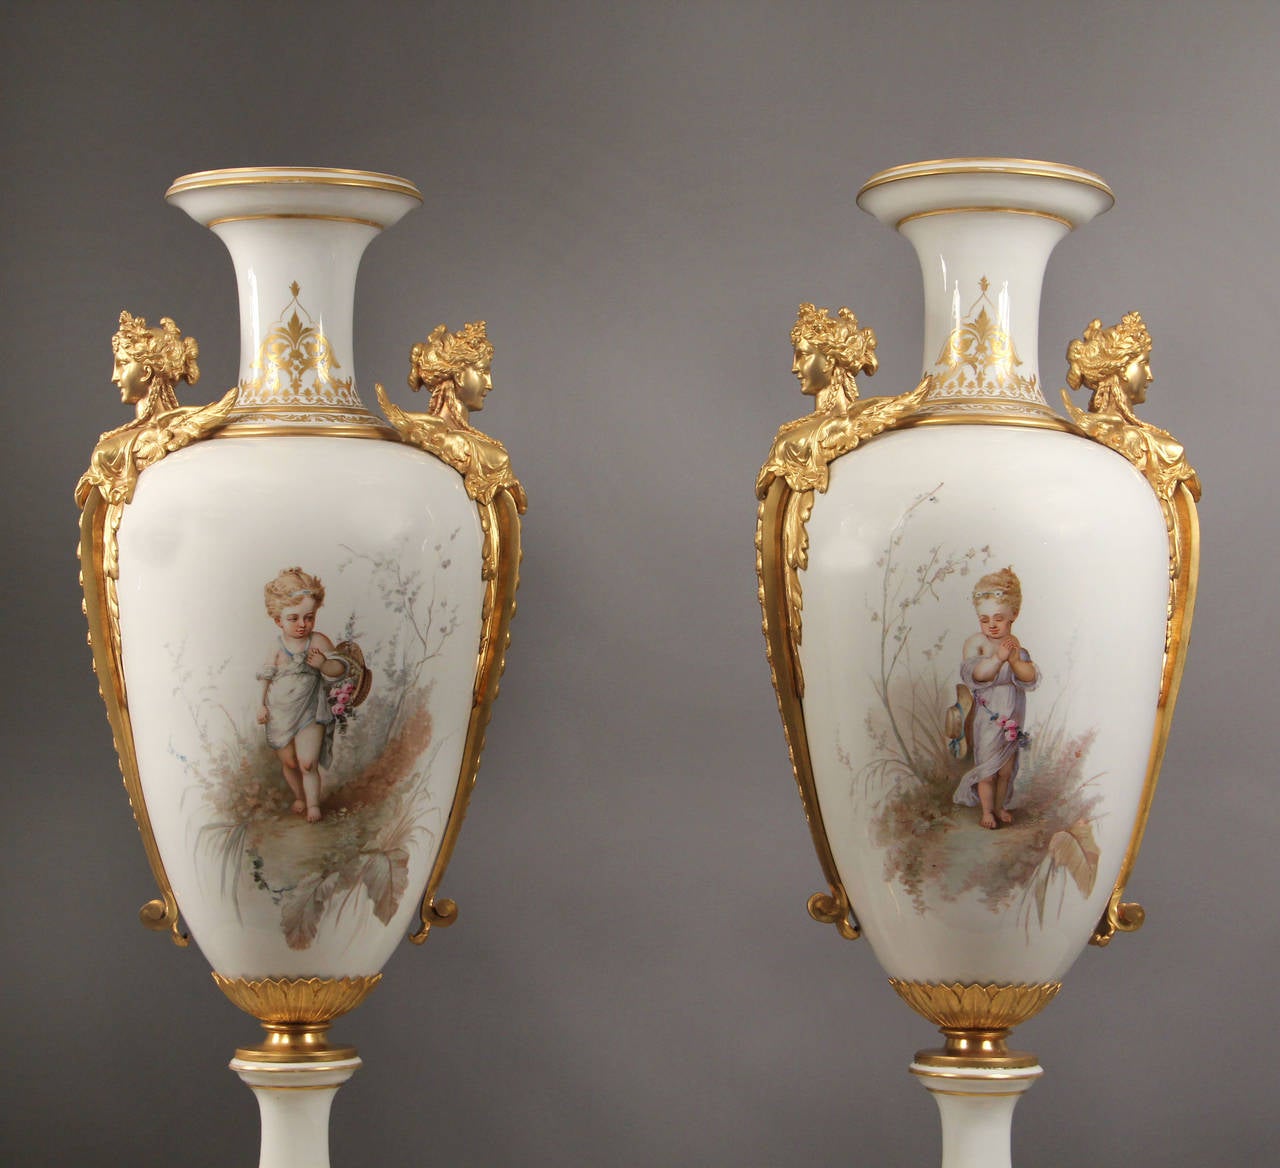 Belle Époque A Rare Pair of Late 19th Century Gilt Bronze Mounted White Sèvres Style Vases